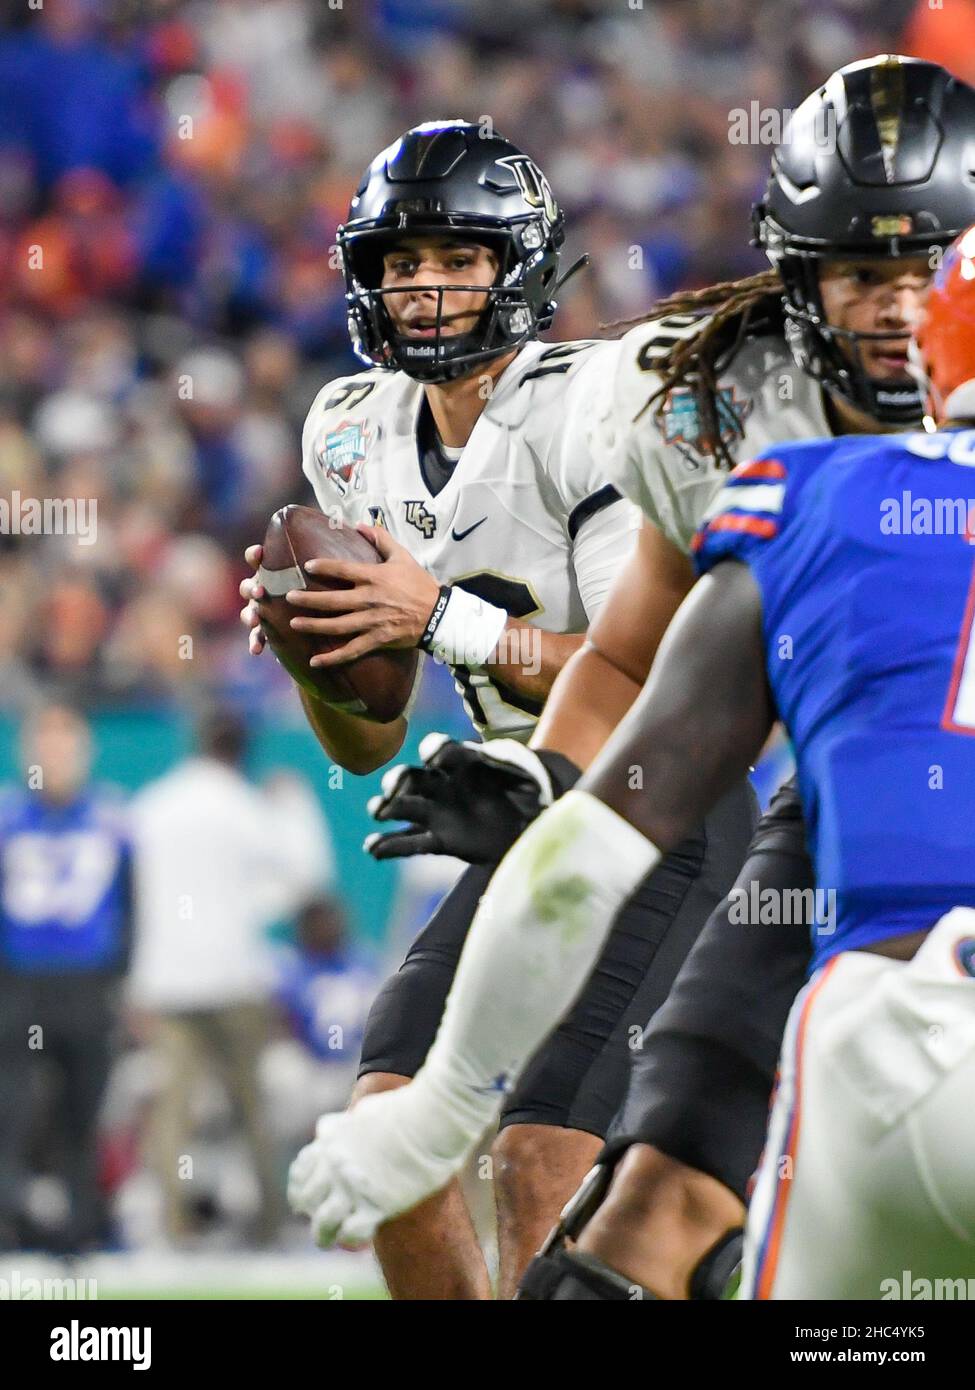 Tampa, FL, USA. 23rd Dec, 2021. UCF Knights quarterback Mikey Keene (16) during the 1st half of Union Home Mortgage Gasparilla Bowl between the Florida Gators and the UCF Knights at Raymond James Stadium in Tampa, FL. Romeo T Guzman/CSM/Alamy Live News Stock Photo